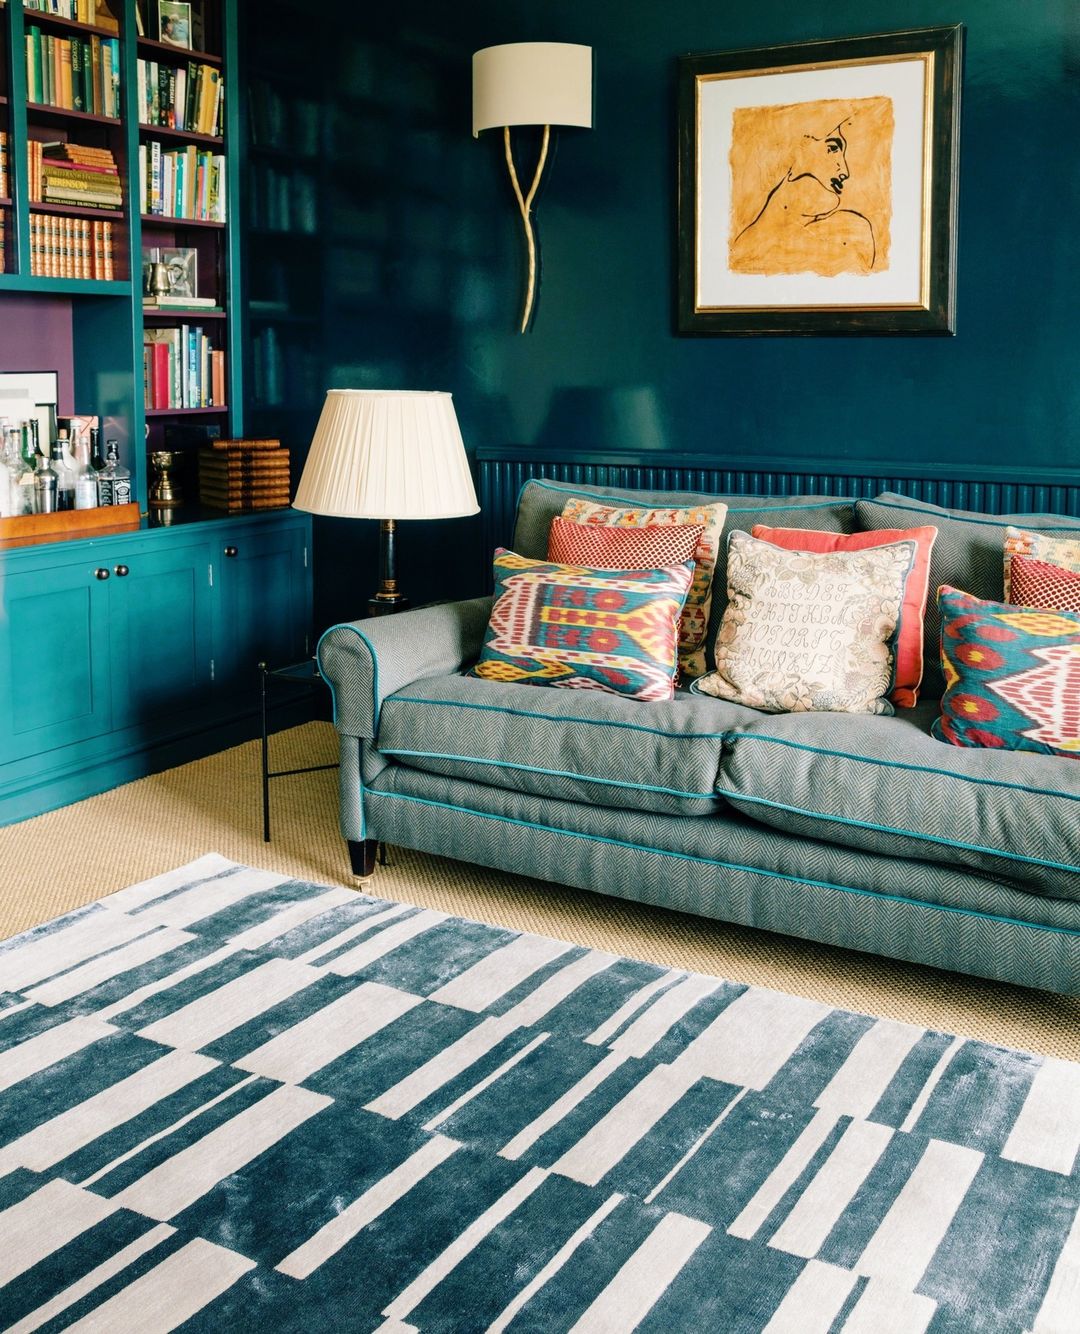 15 Different Rug Designs You Can Have for Your House - Talkdecor